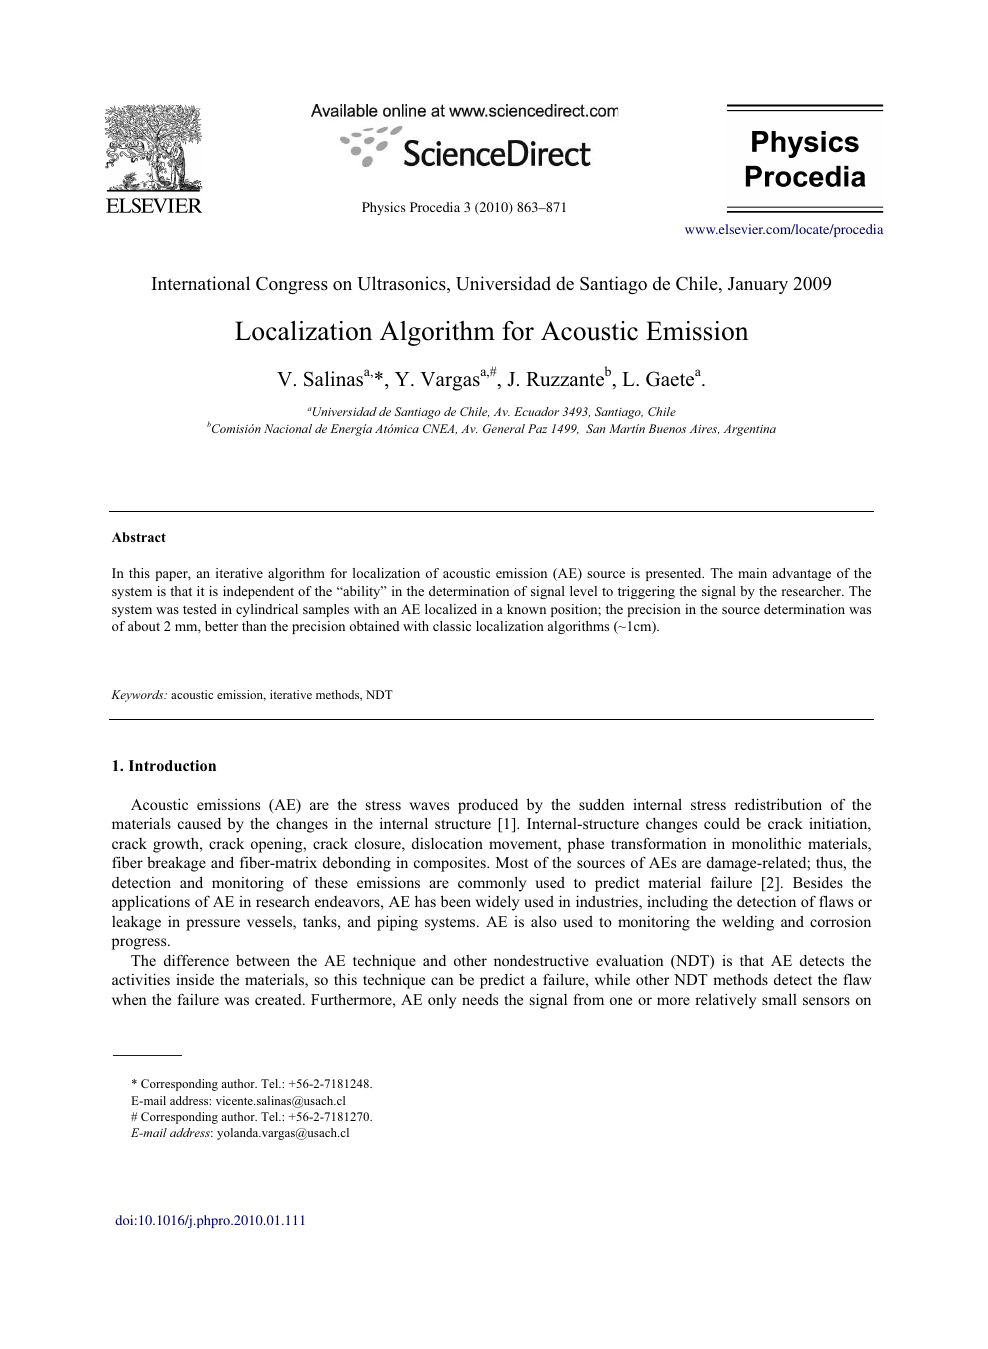 Localization Algorithm For Acoustic Emission Topic Of Research Paper In Mechanical Engineering Download Scholarly Article Pdf And Read For Free On Cyberleninka Open Science Hub